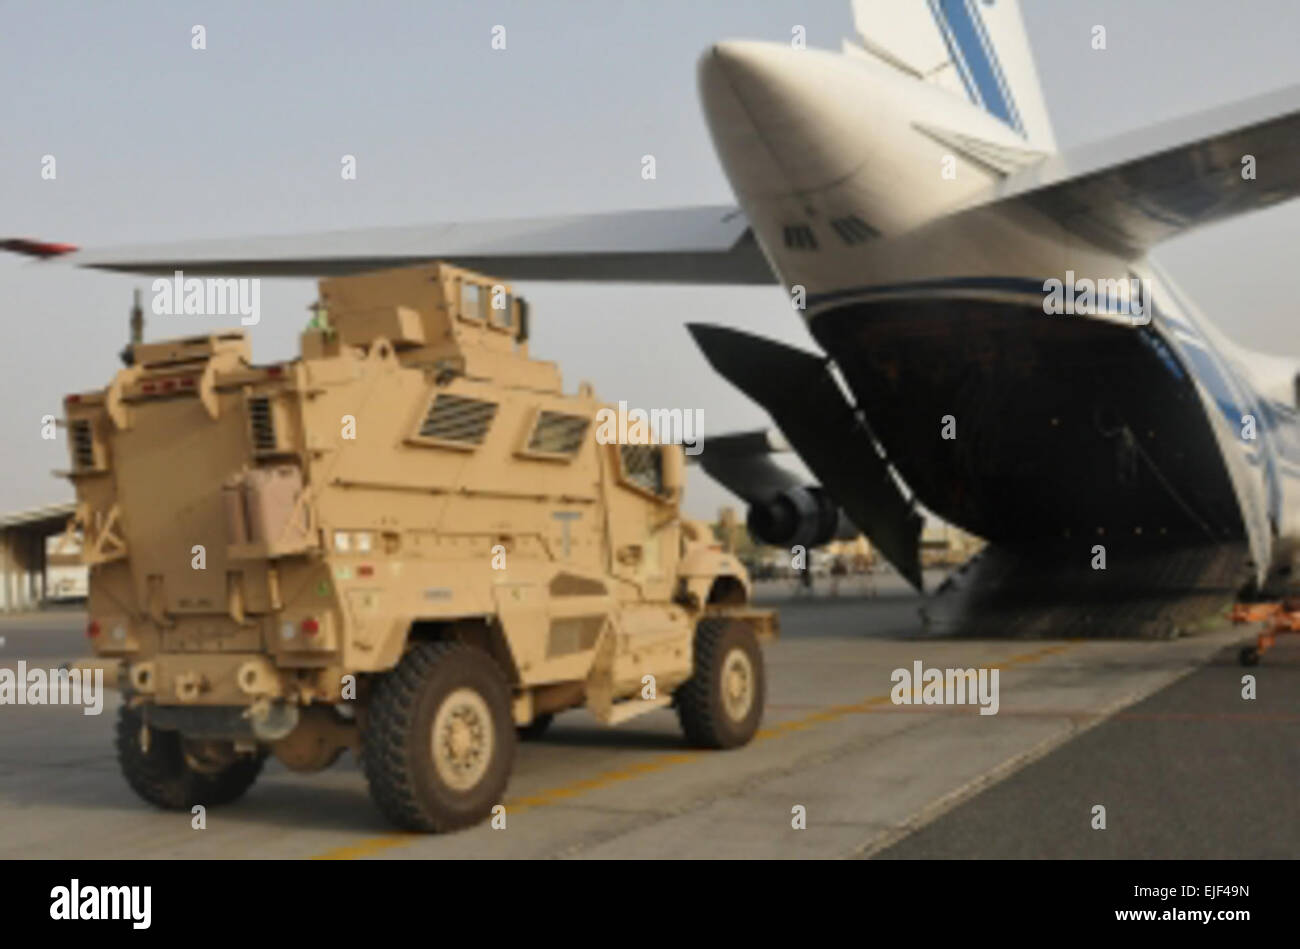 Mine Resistant Ambush Protected Maxx Pro vehicles are loaded onto a transport aircraft in support of the responsible drawdown of U.S. forces in Iraq. The 62nd Chemical Company provides the security for the vehicles throughout the flight.   Spc. Karen Kozub Stock Photo